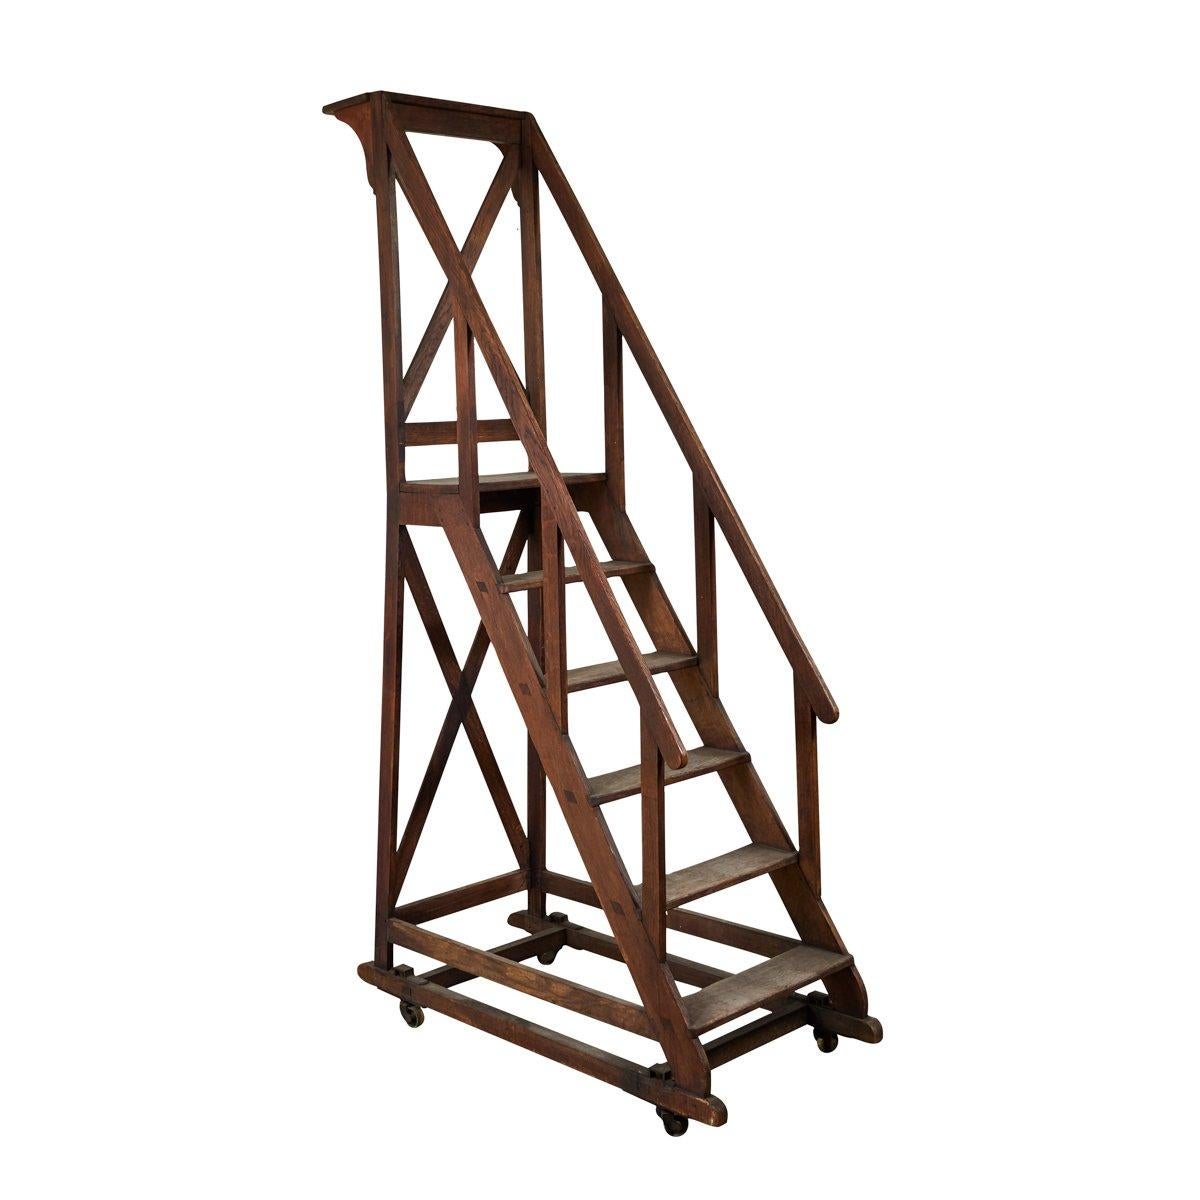 Late 19th-century book ladder from the National Library in Paris.  An extremely special item, the ladder is mounted on casters, and is constructed of a deep, chestnut-colored wood. A handsome architectural piece that would make a simple and refined